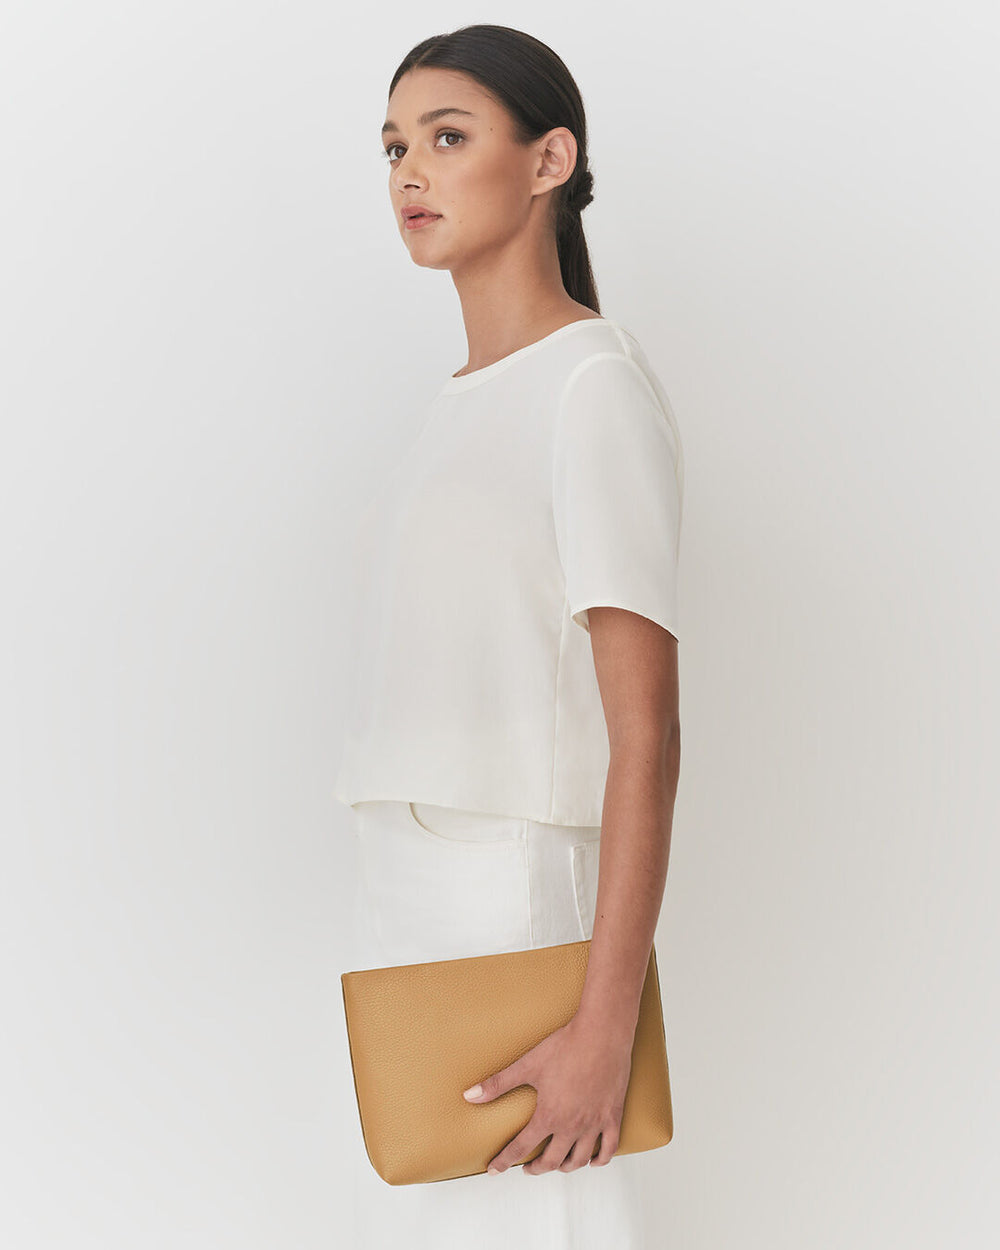 Woman standing with a clutch bag, looking to the side.